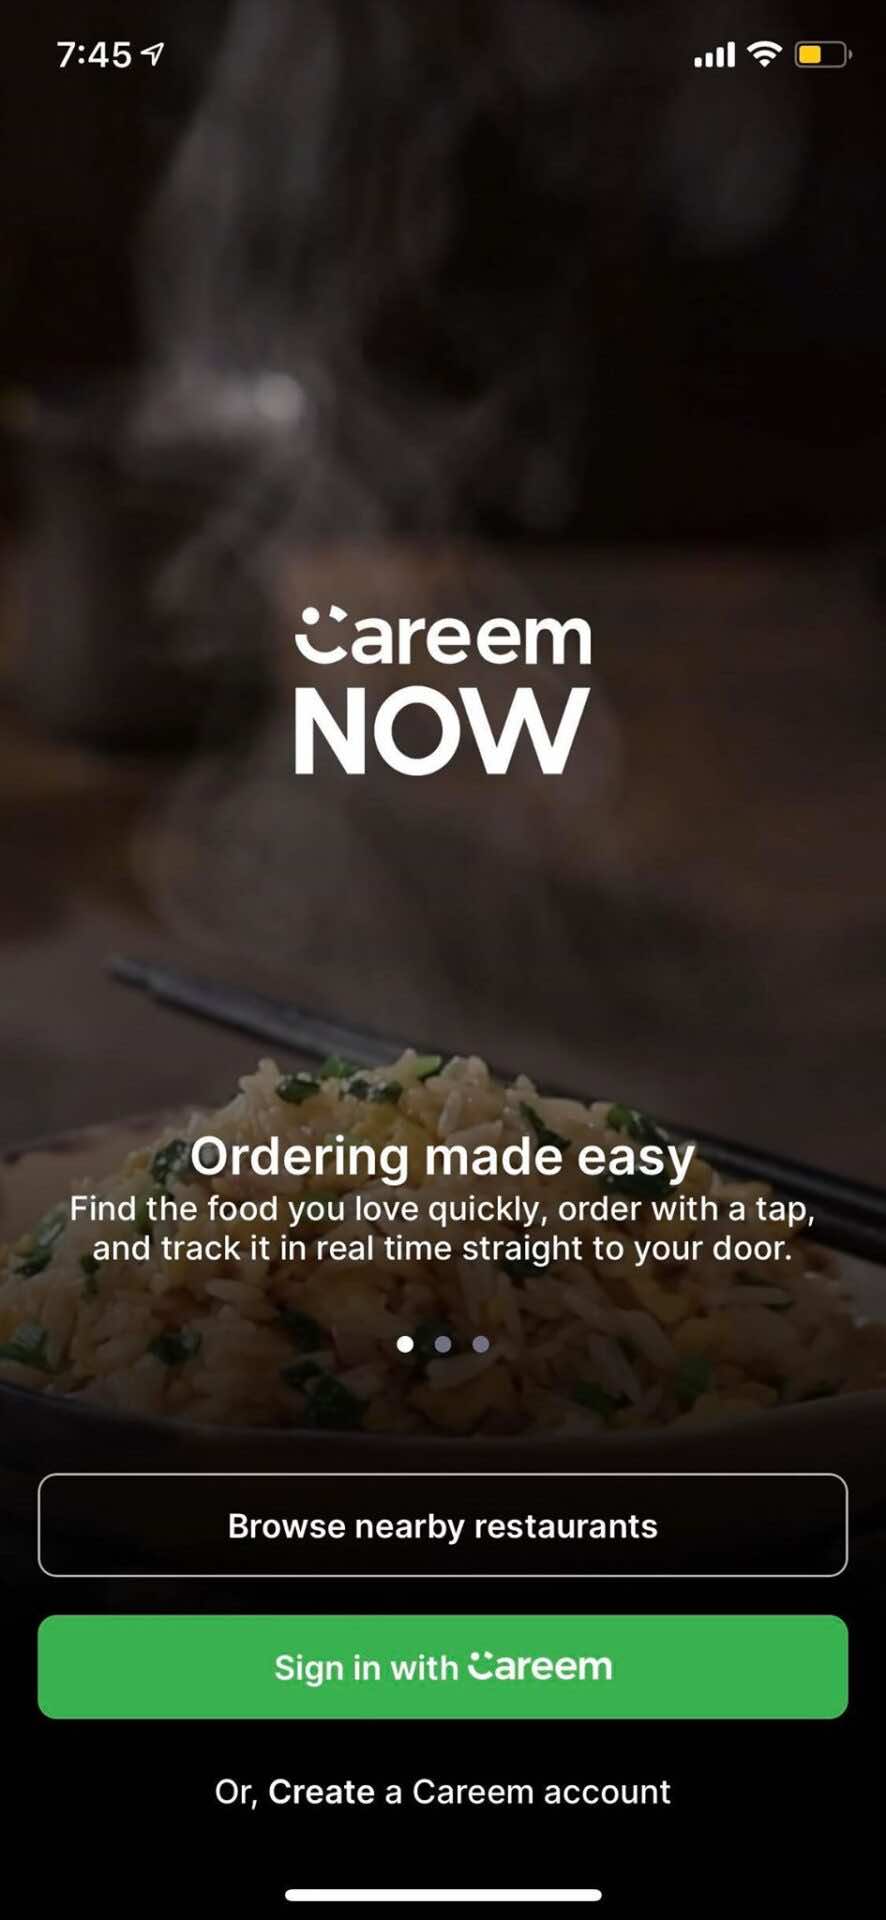 Careem expands its food delivery service 'Careem Now' to Amman